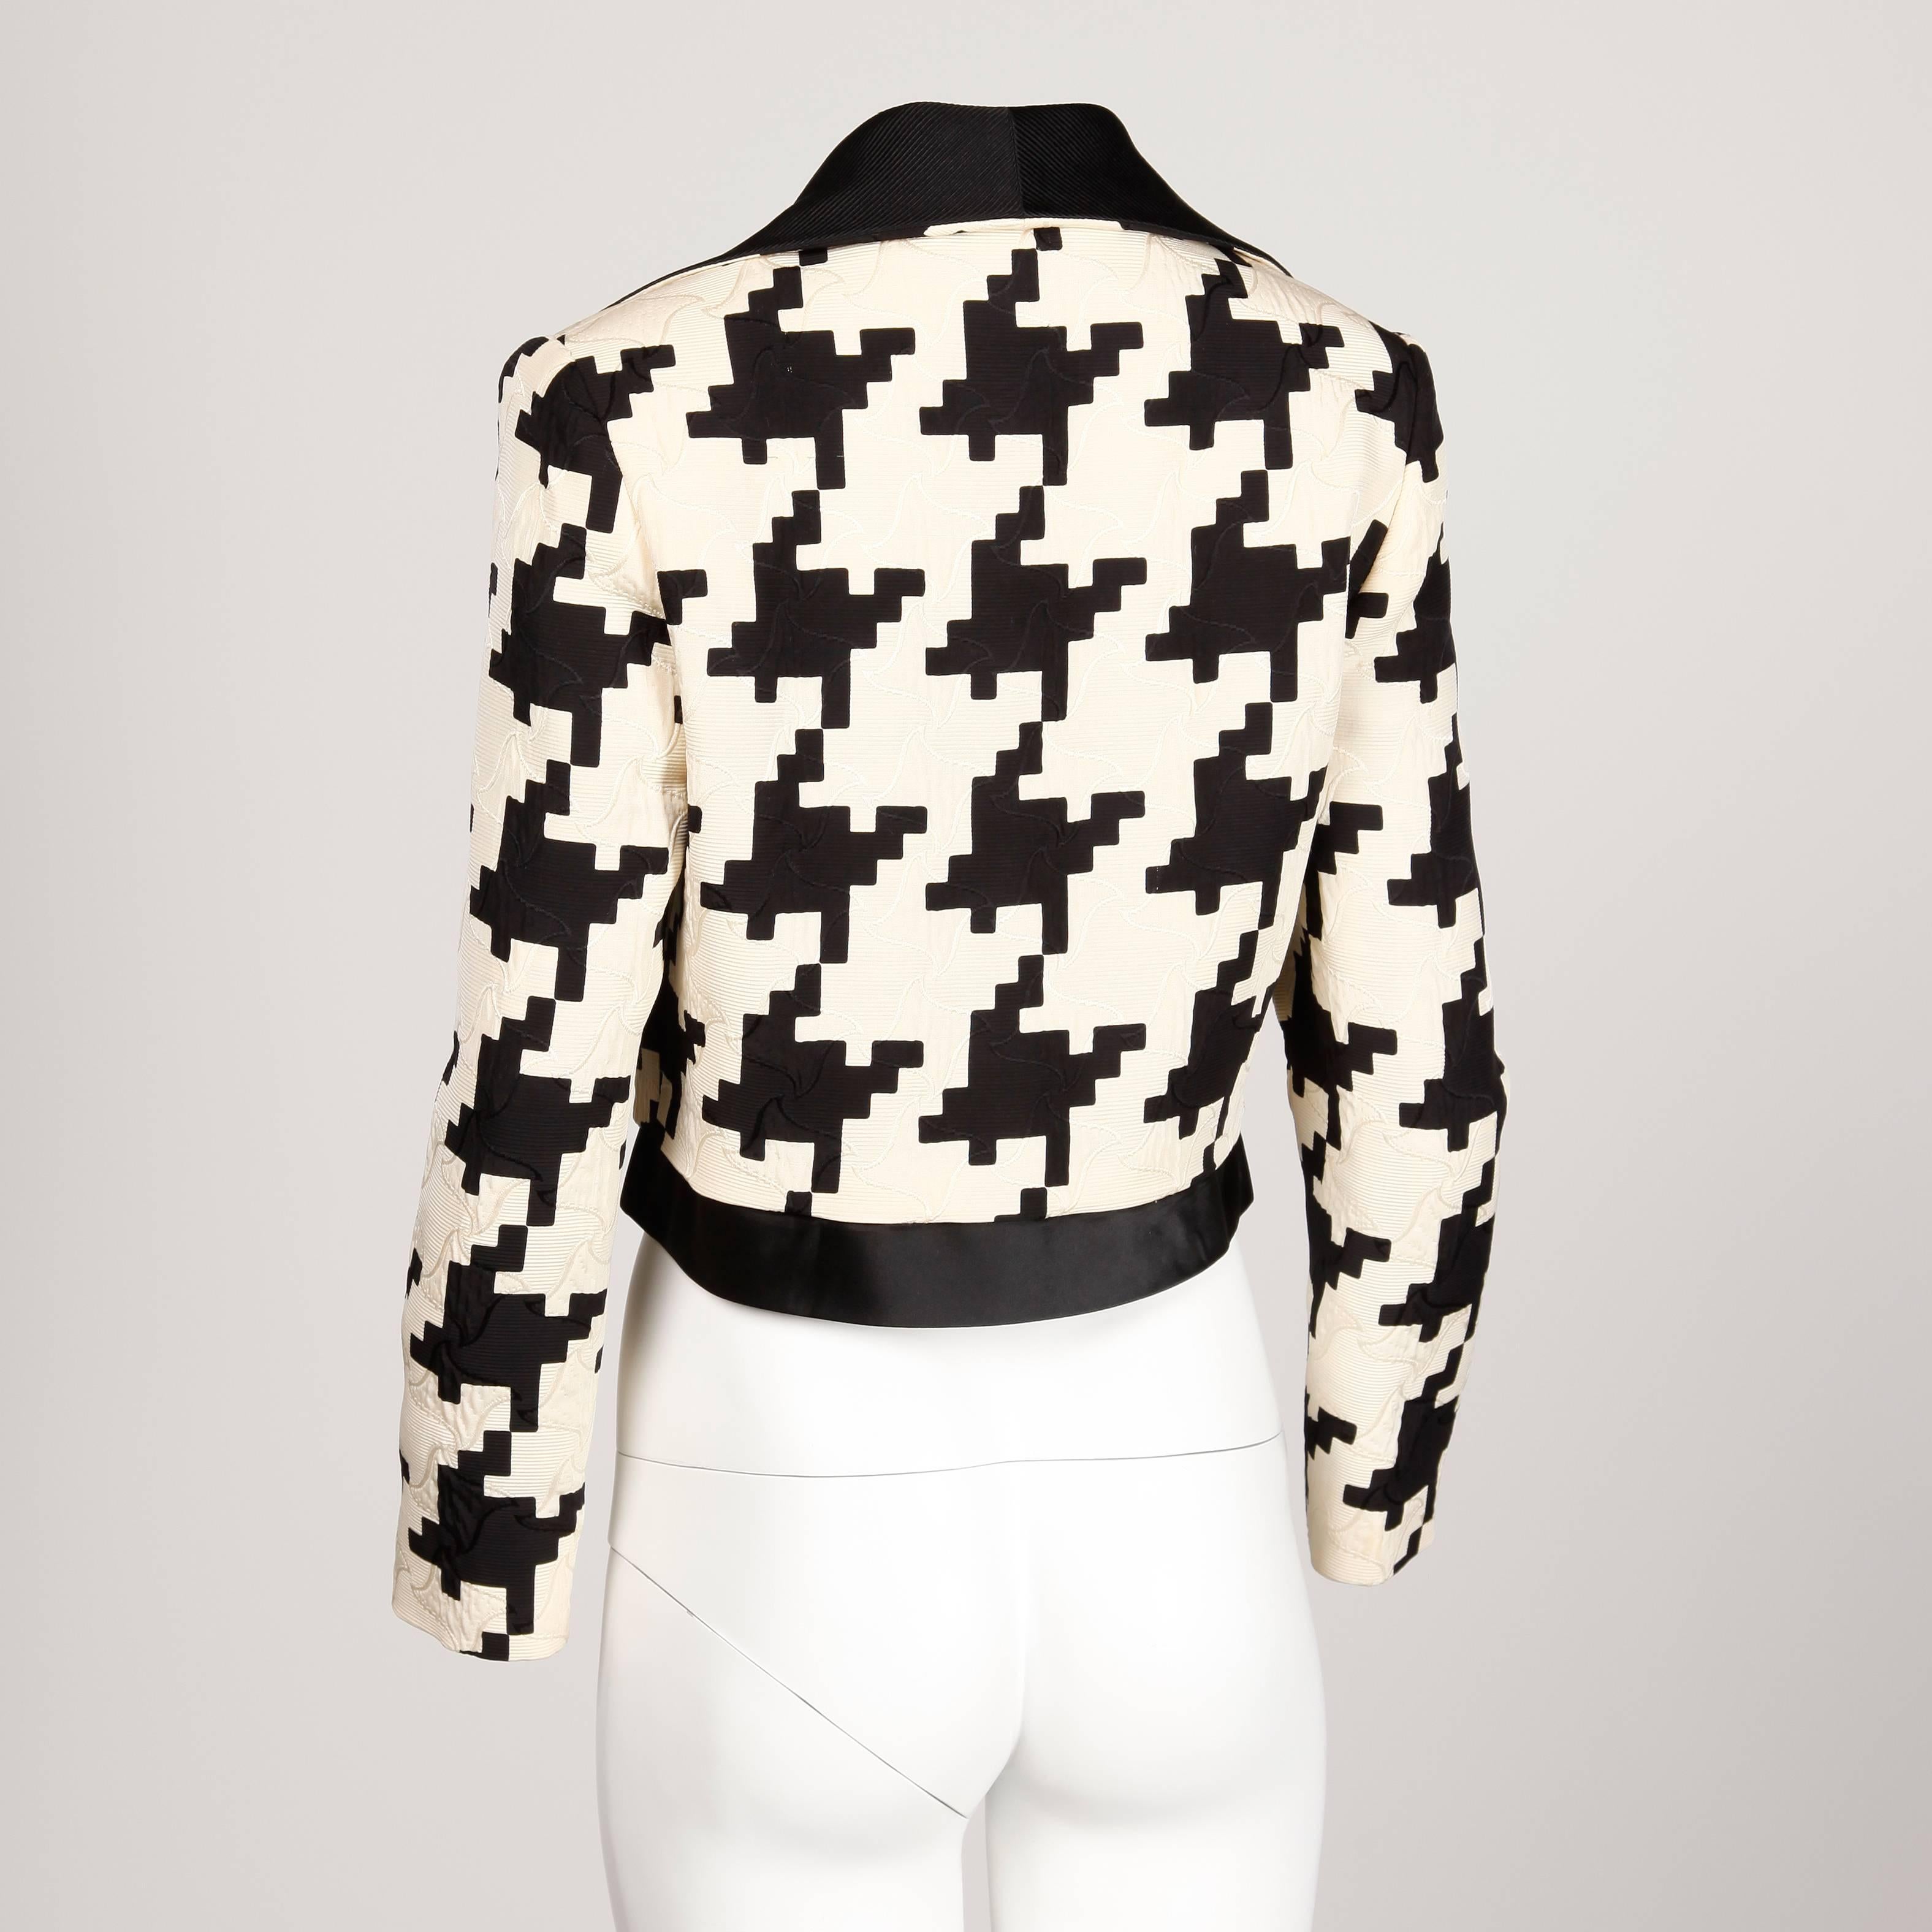 Amazing vintage oversized houndstooth print jacket by Gianni Versace for Genny. Beautiful silk/ wool fabric and matching silk houndstooth lining. The jacket has a black collar and does not close in front. Very chic!

Details: 

Fully